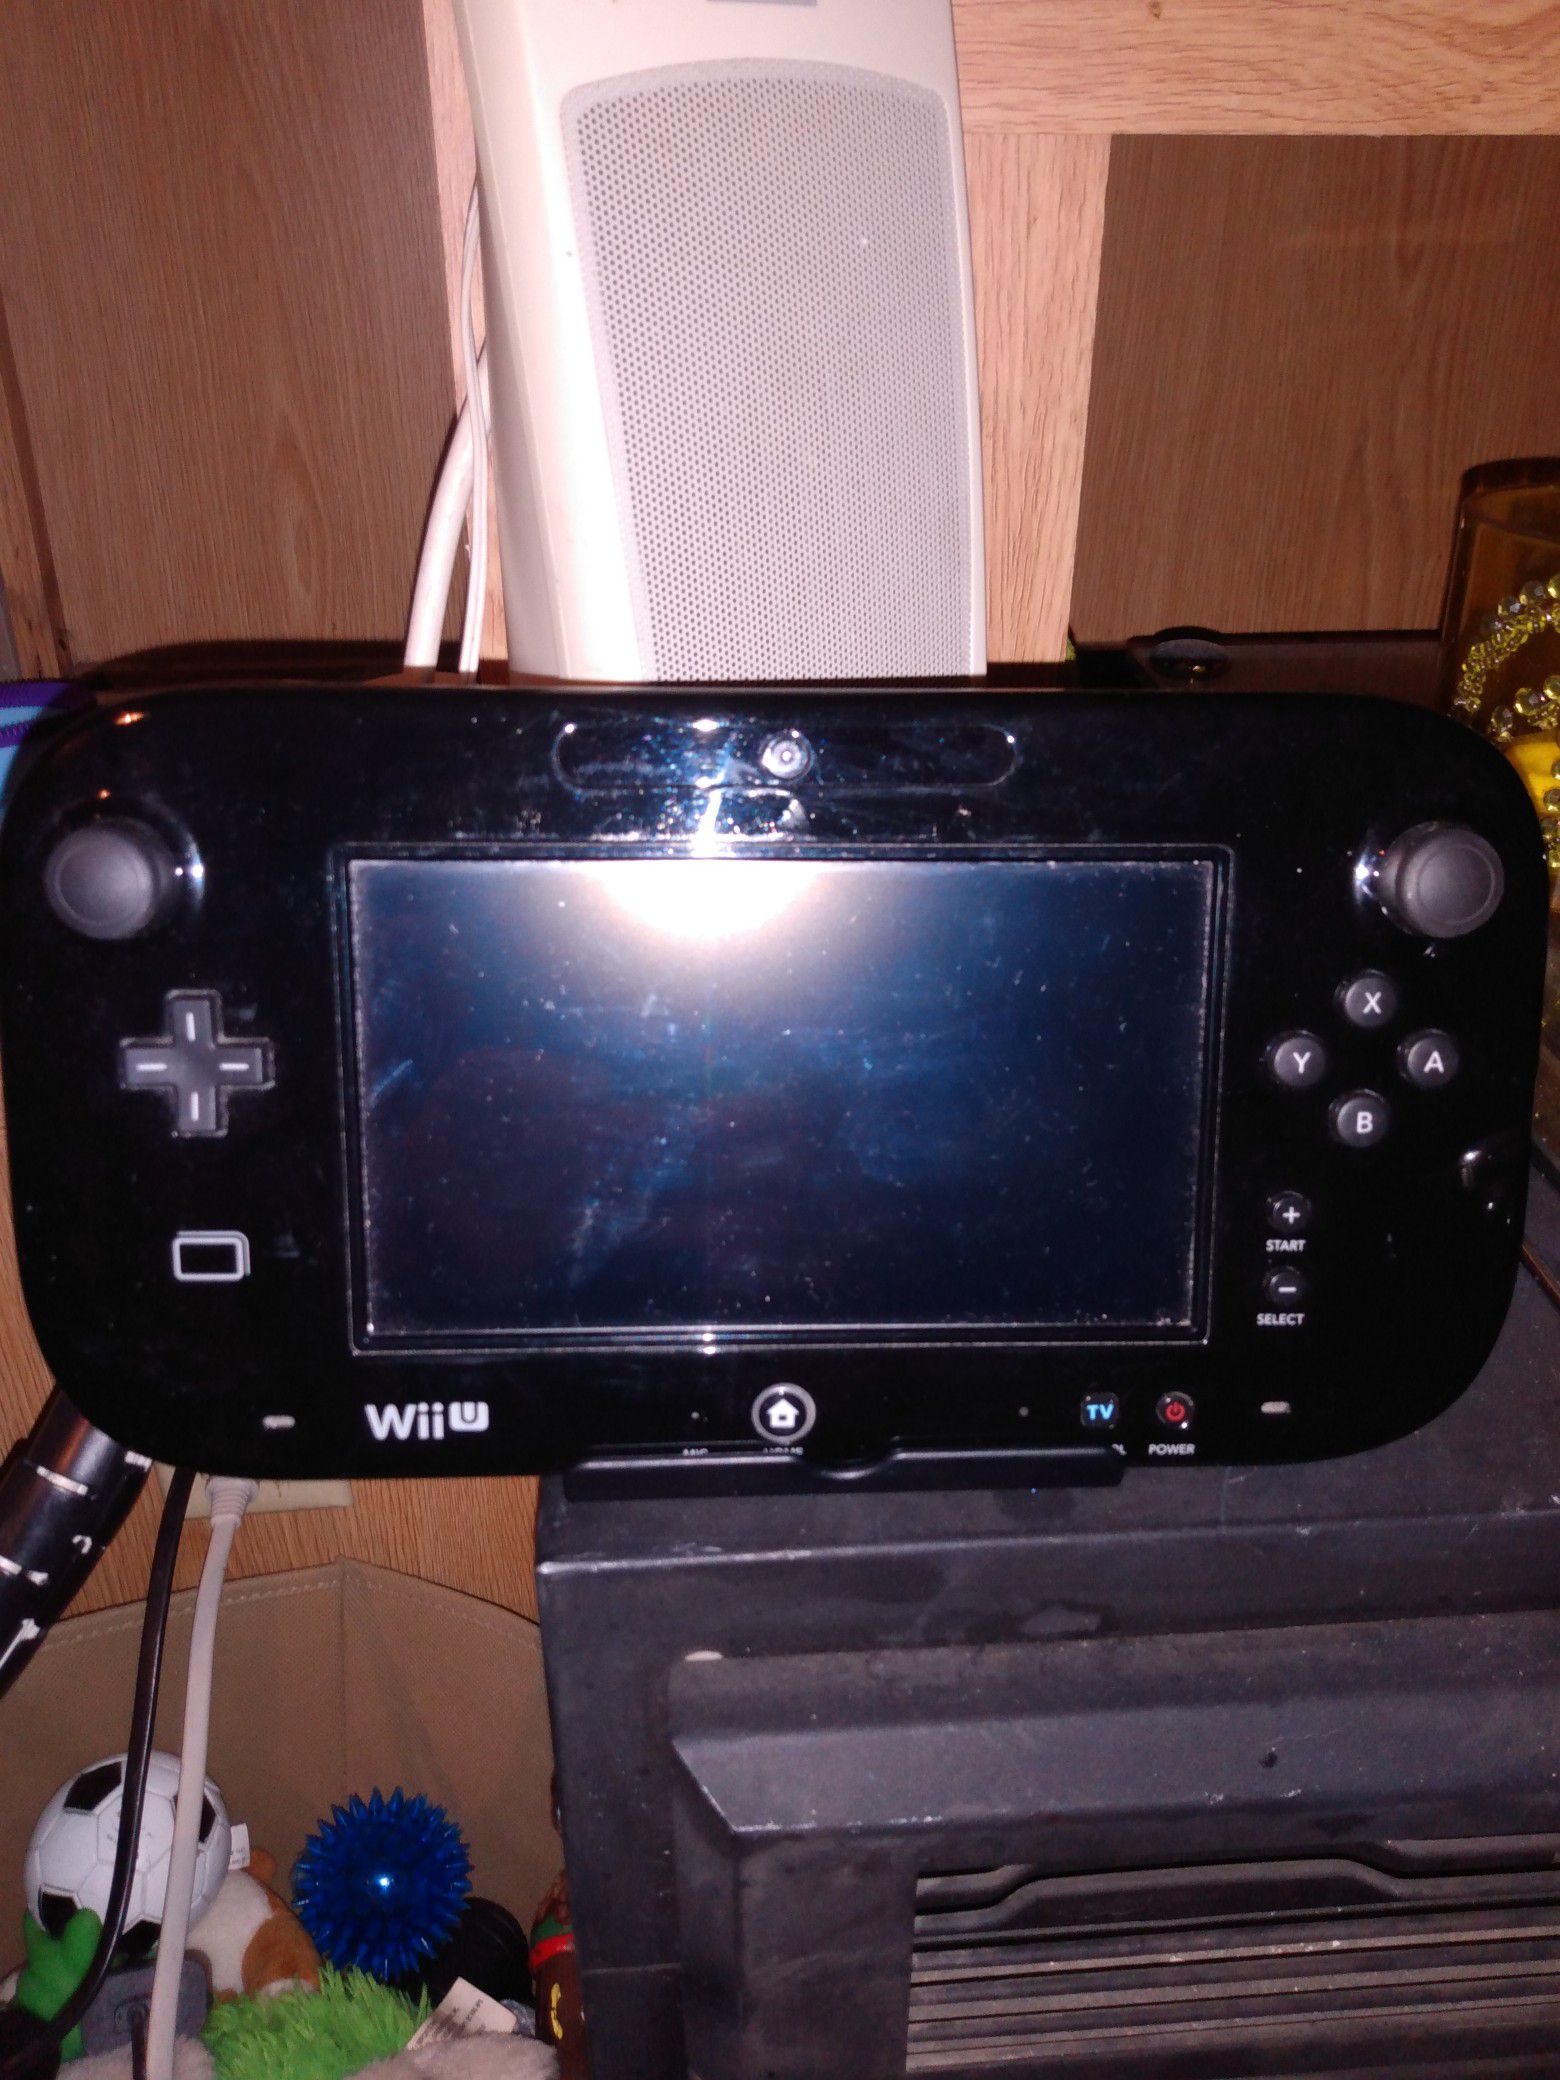 "Look" wii u gamepad and stand only